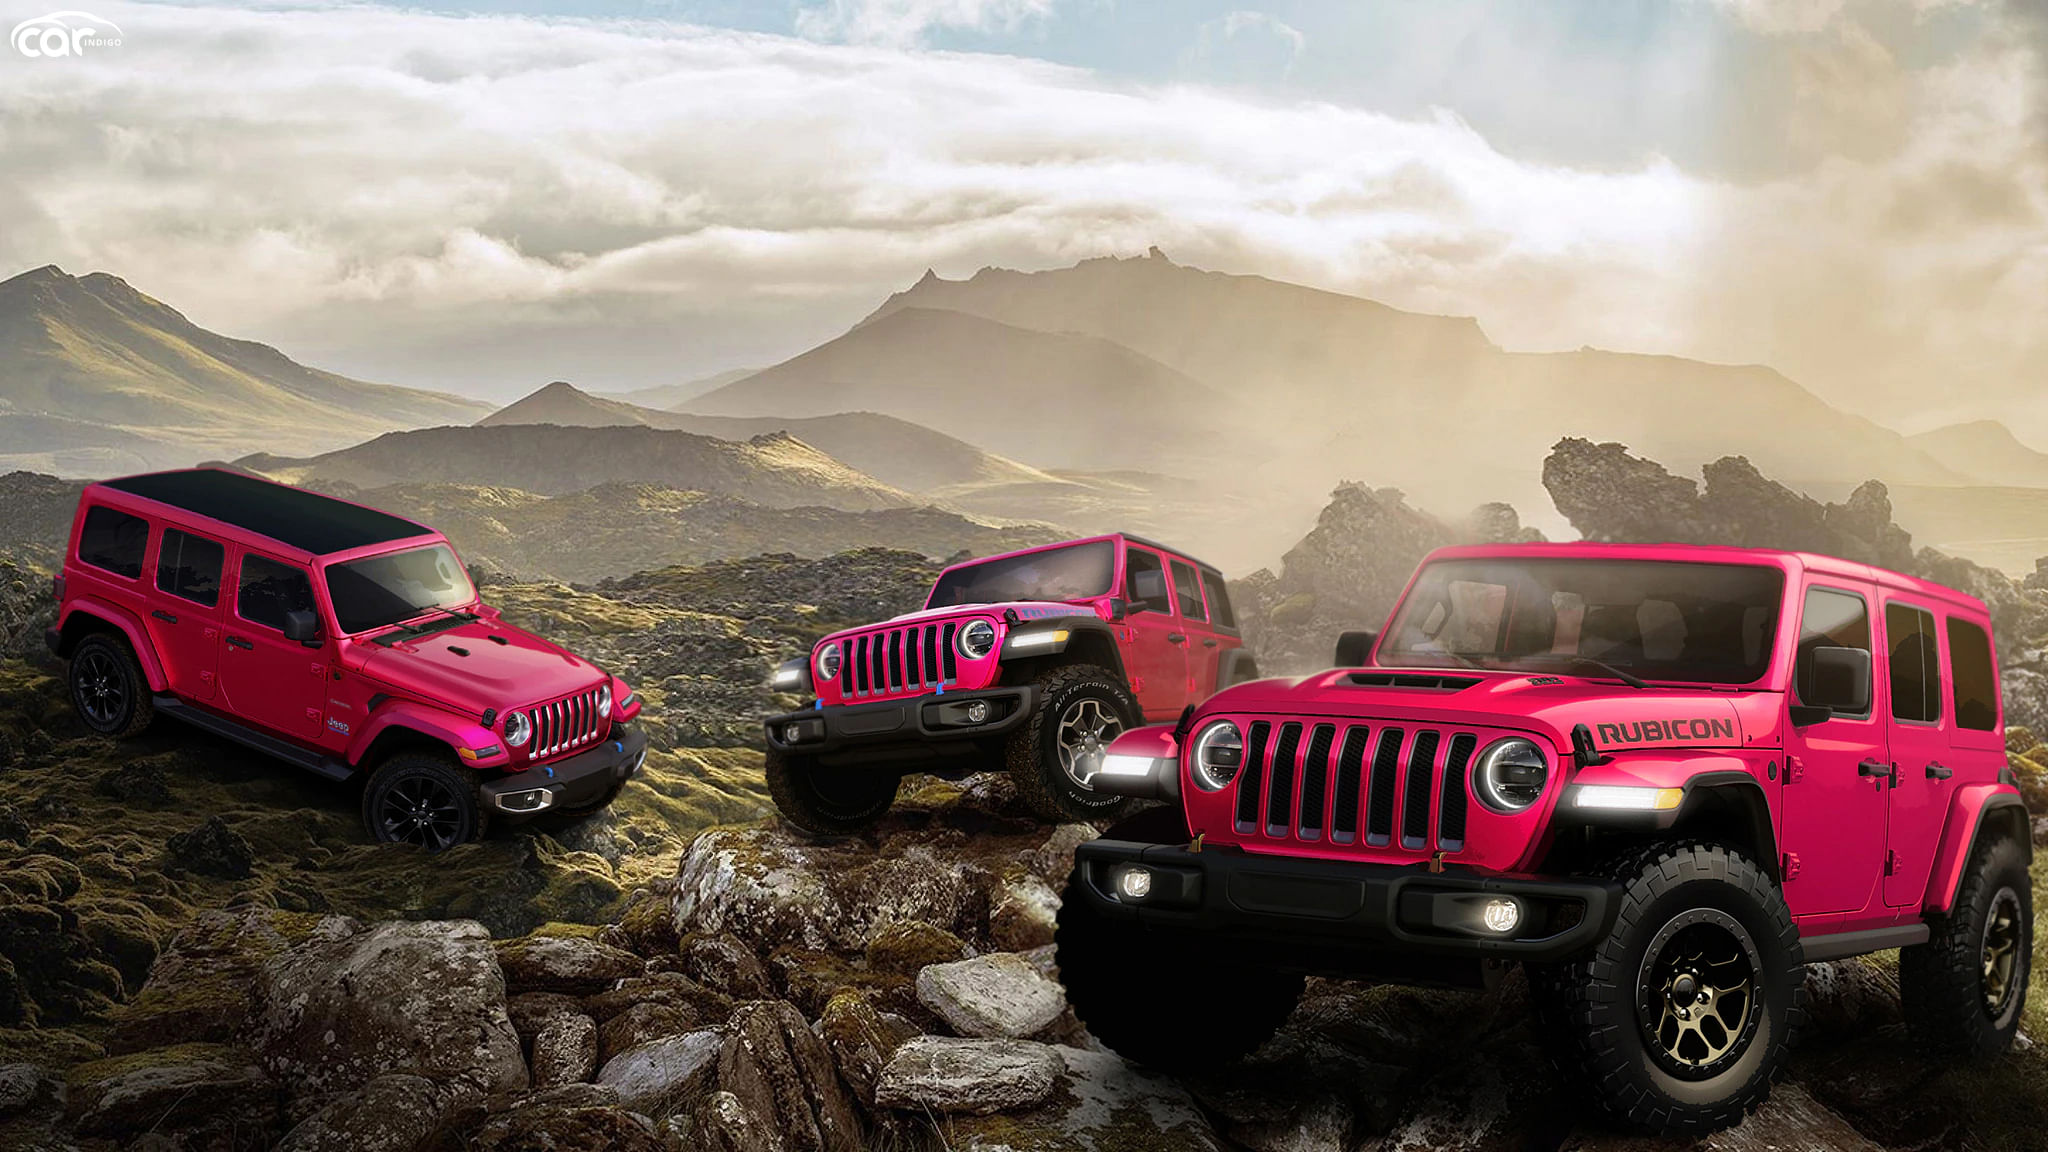 2021 Jeep Wrangler Now Available In Tuscadero Pink Color